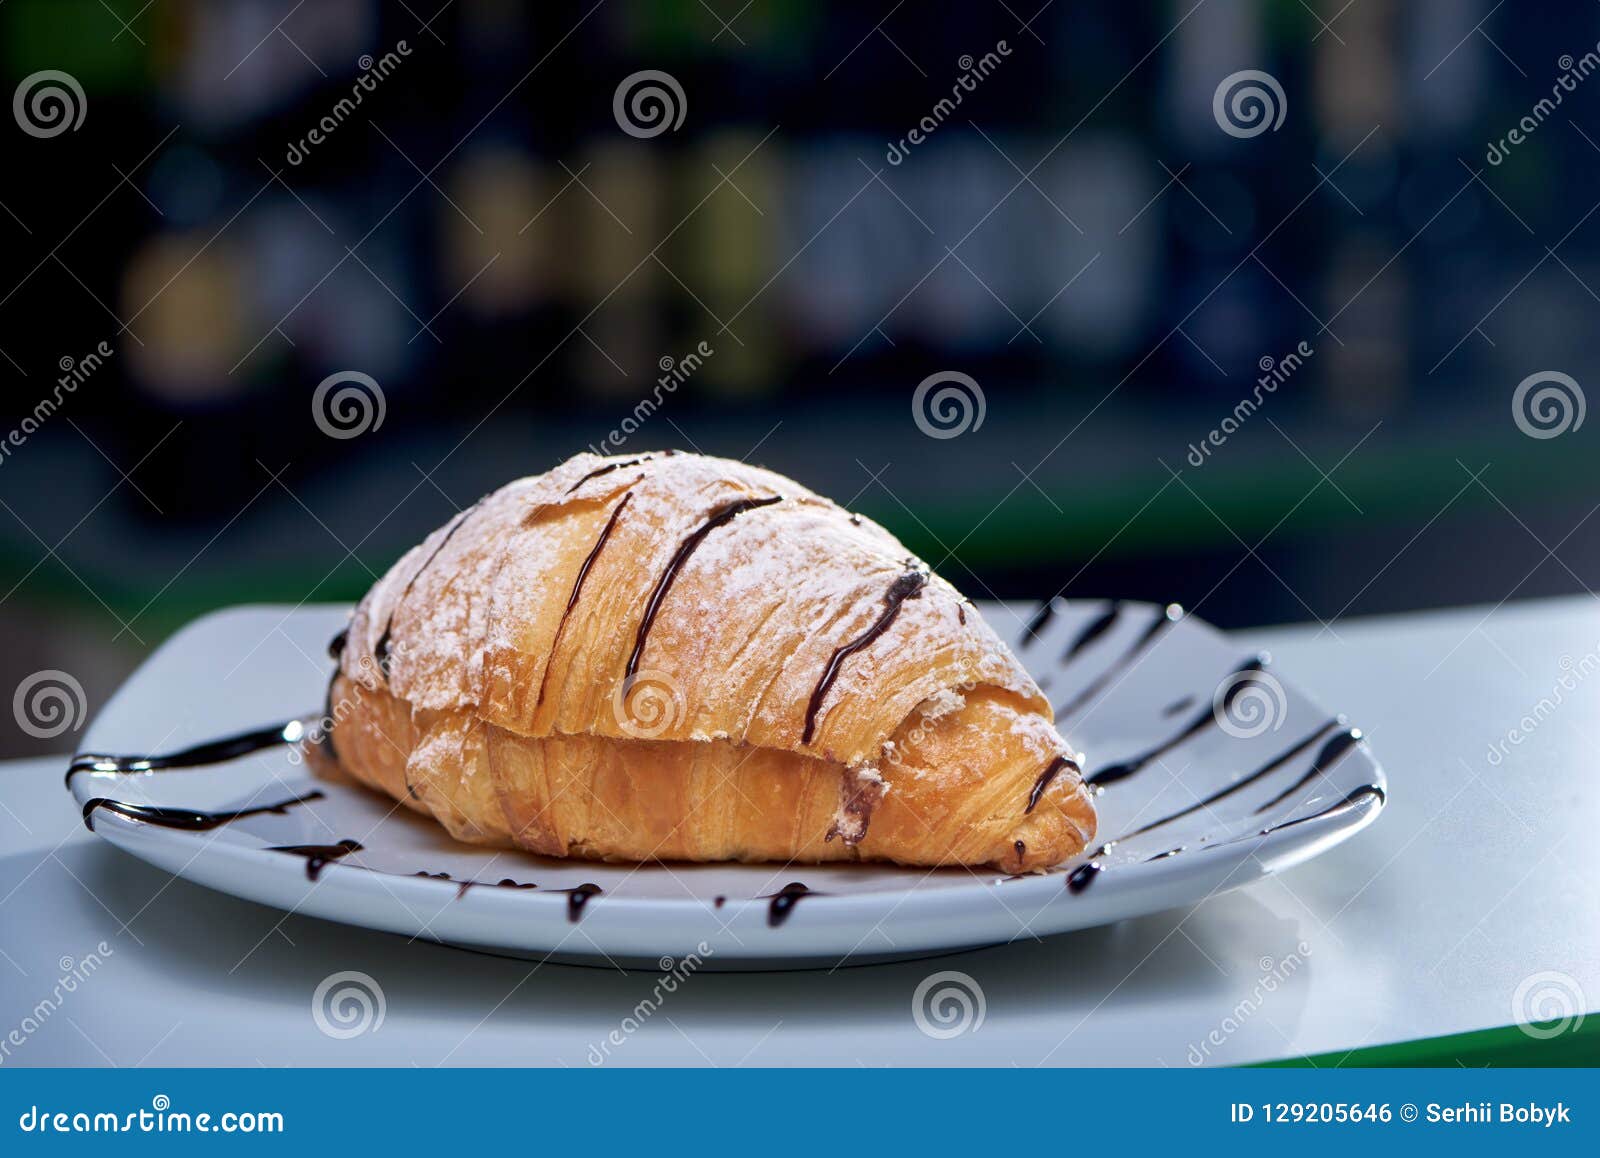 selective focus of delicious croissant poured with chocolate